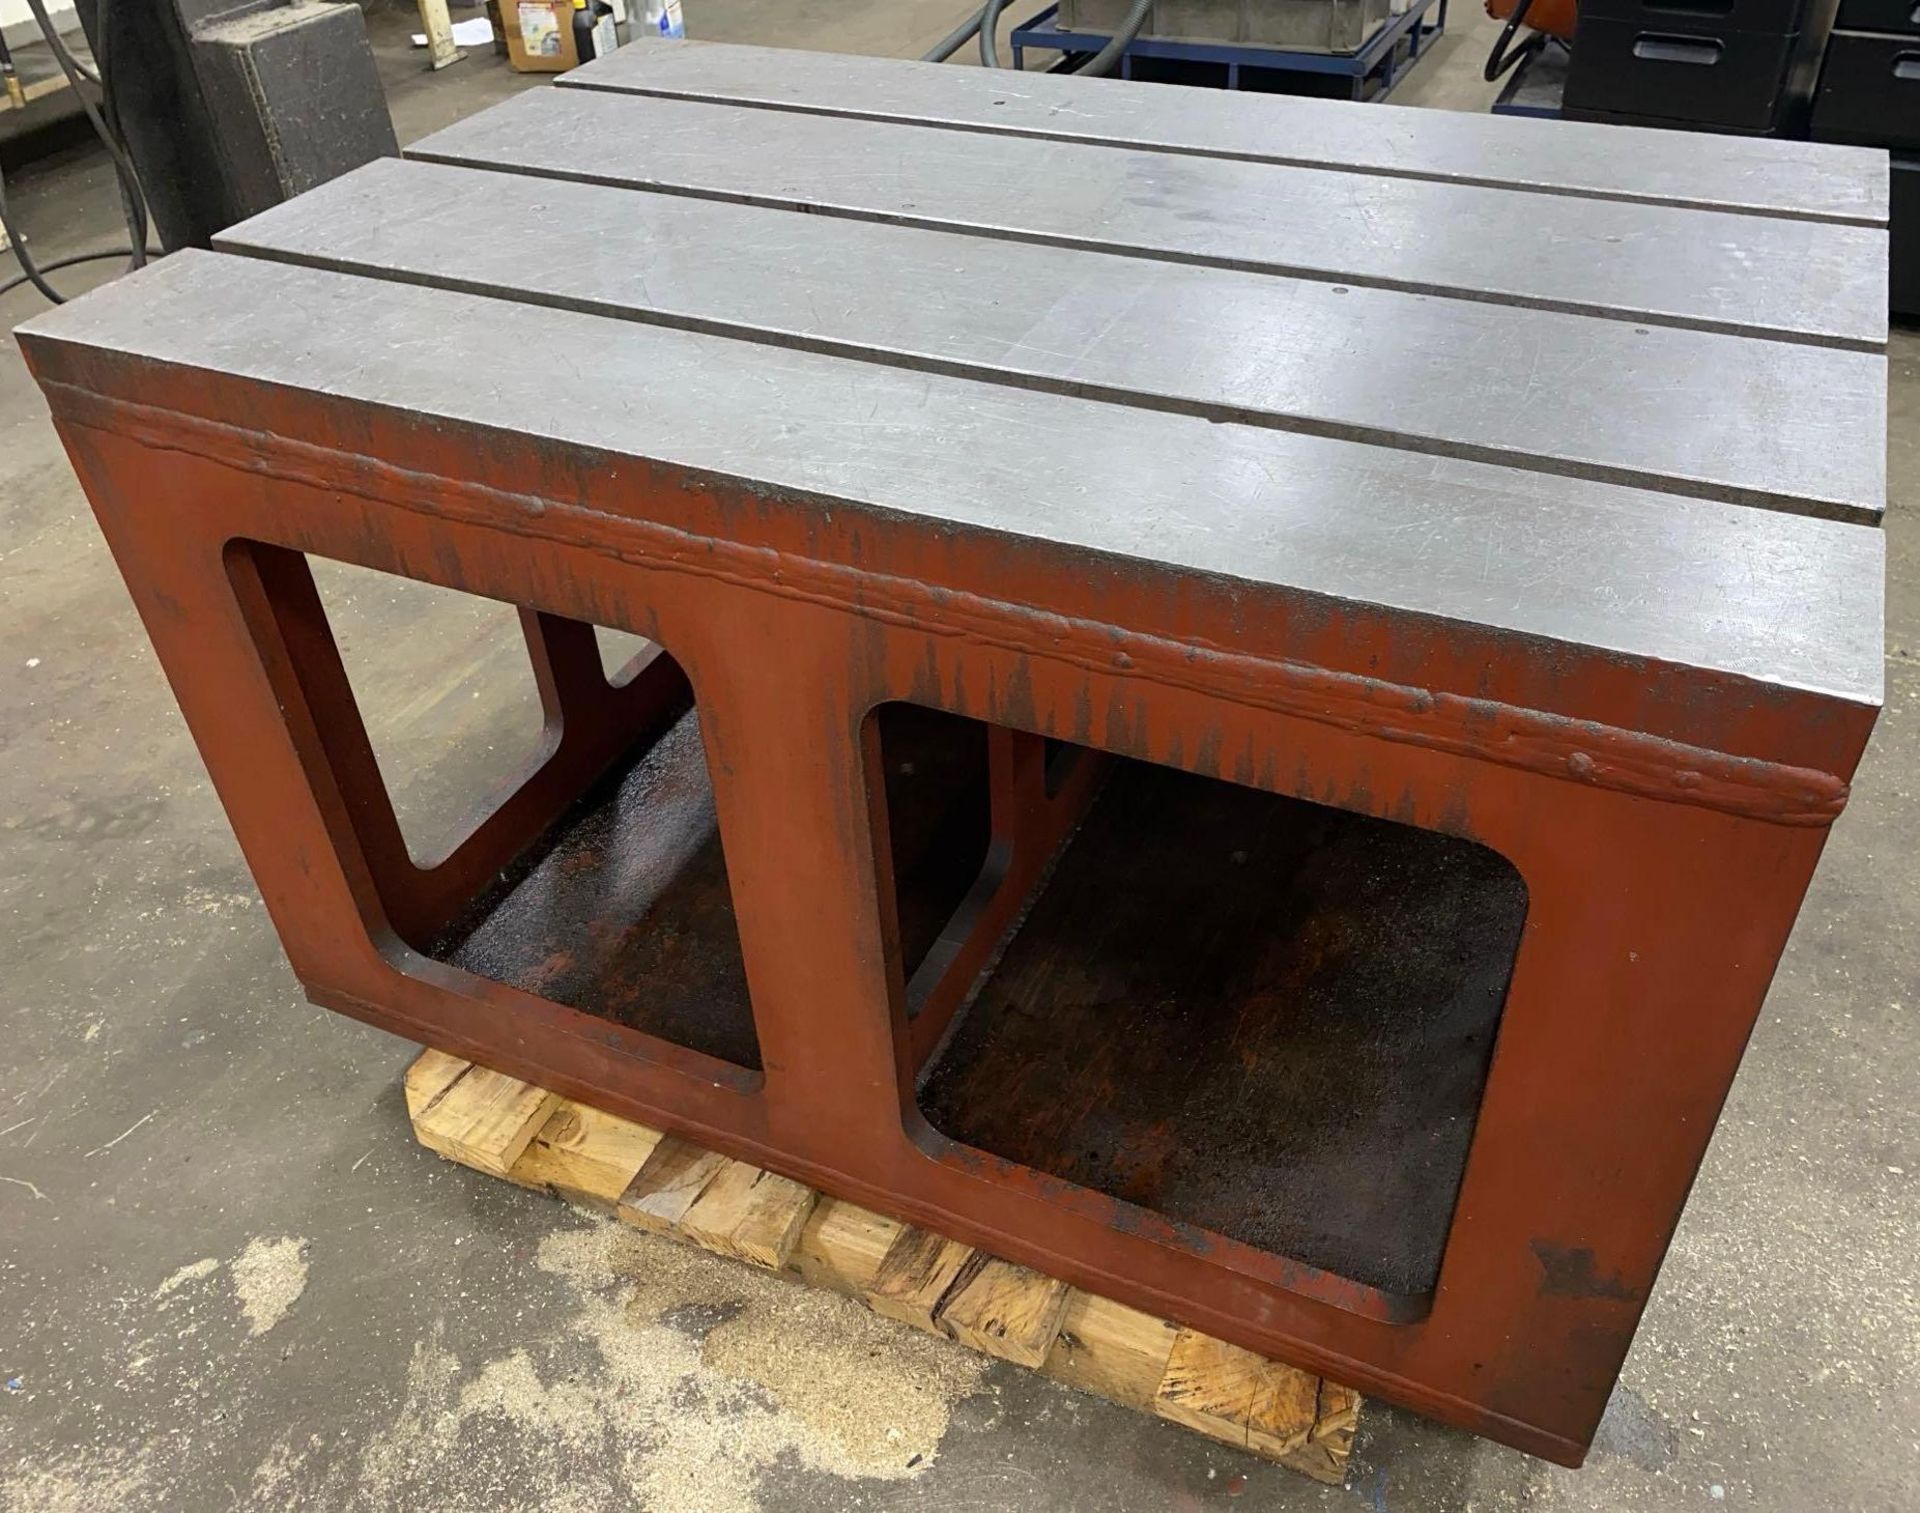 32 x 48 x 28 T-Slotted Box Table - Image 3 of 4